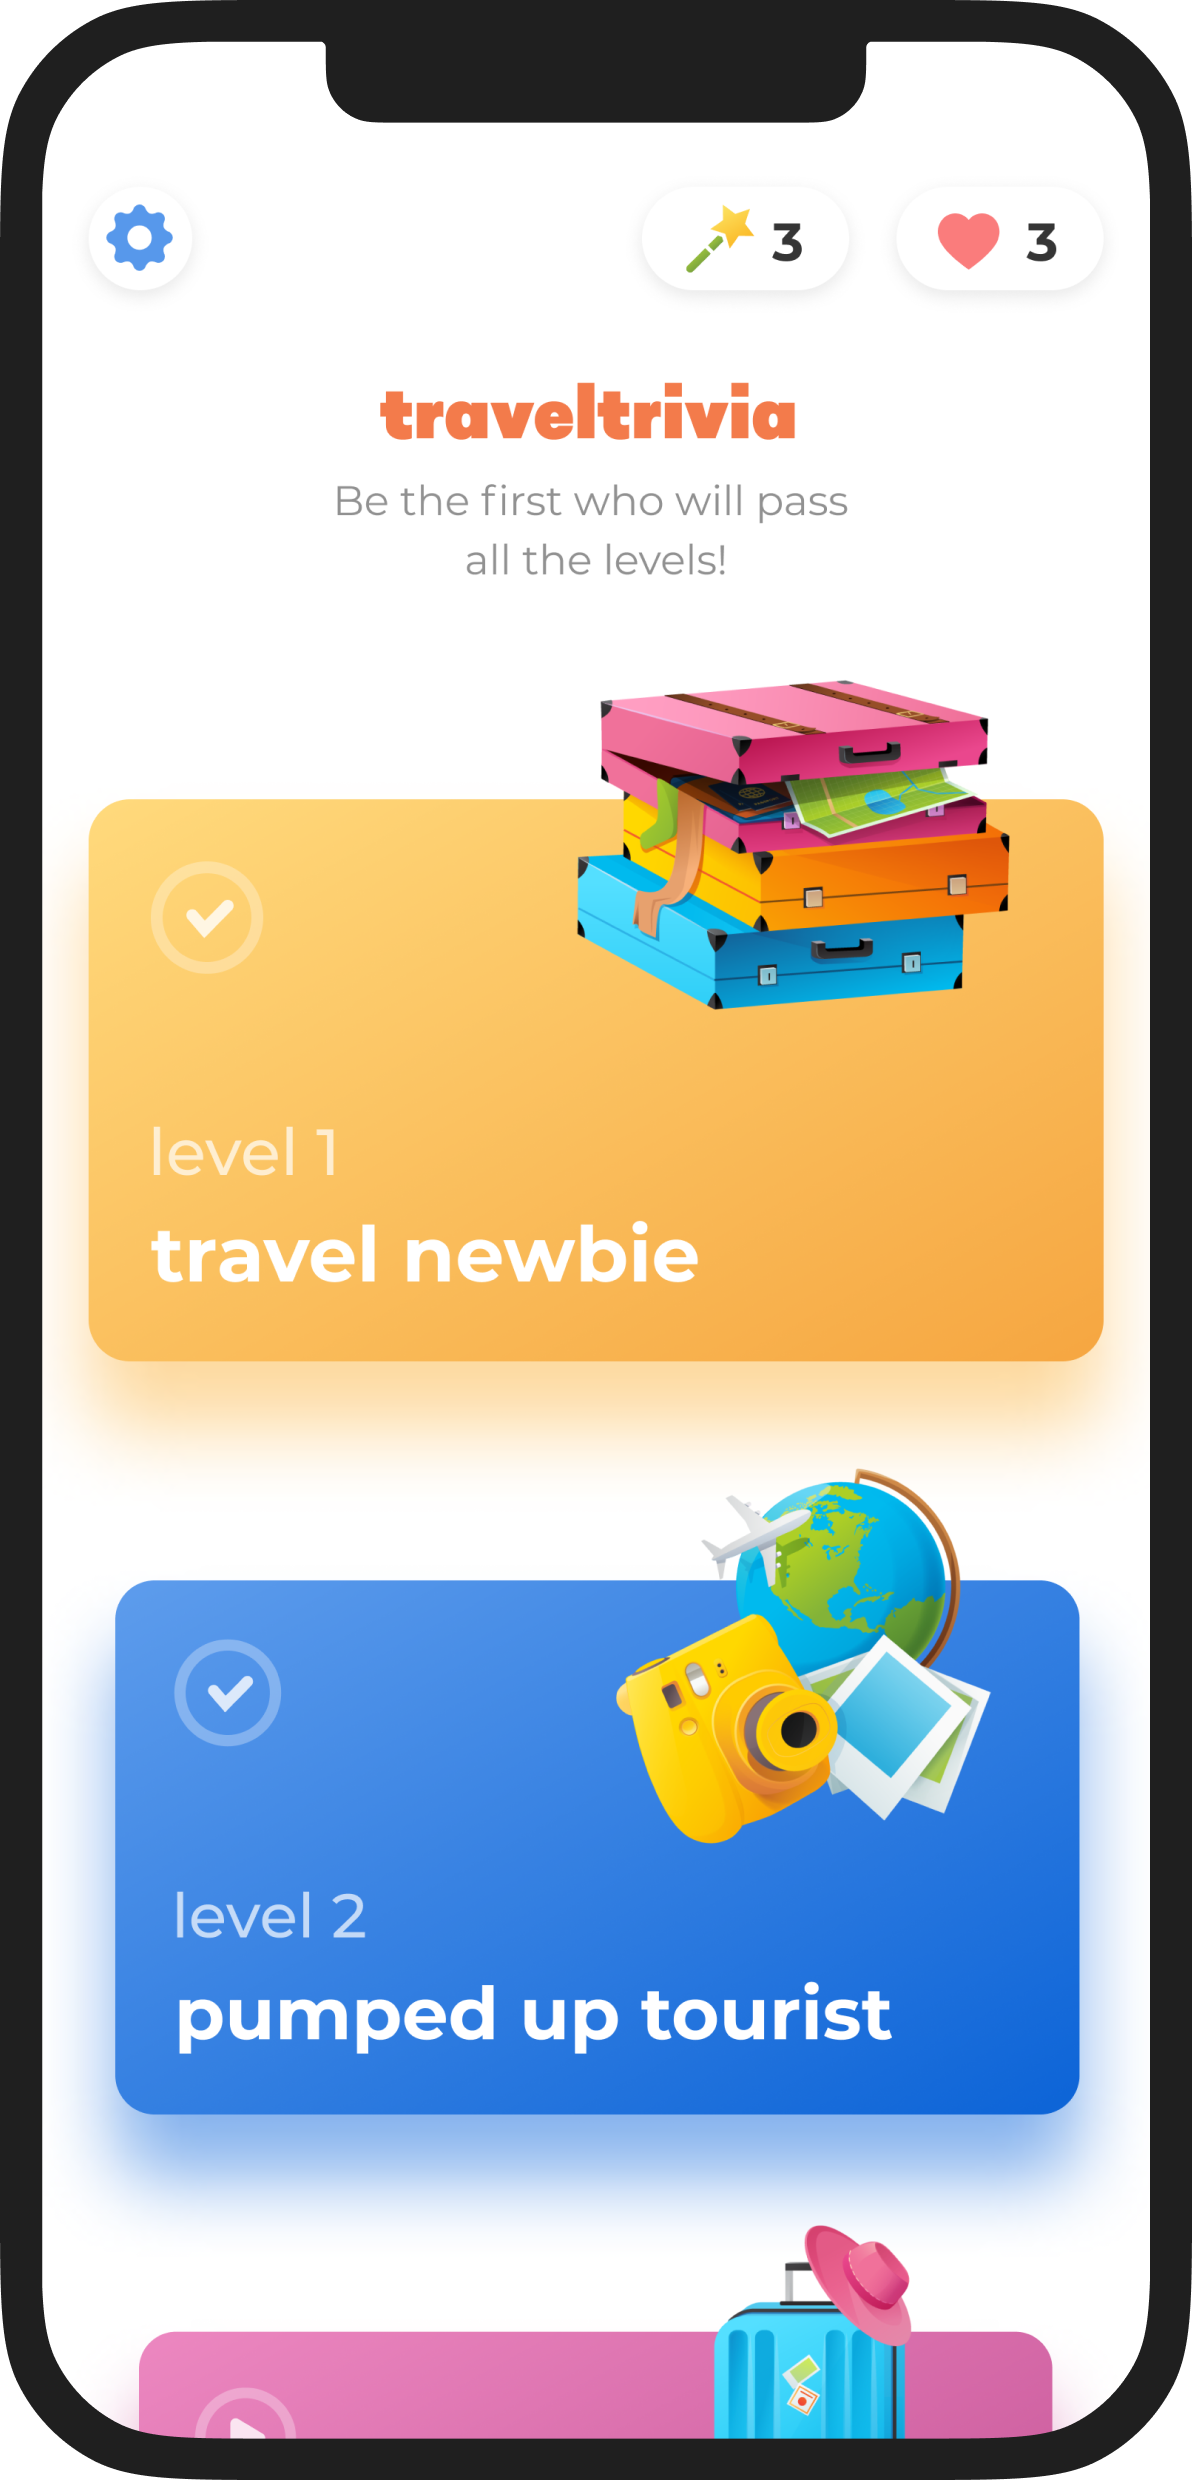 YWS > Works > CaseStudy > TravelTrivia > Features > Quizzes > Image